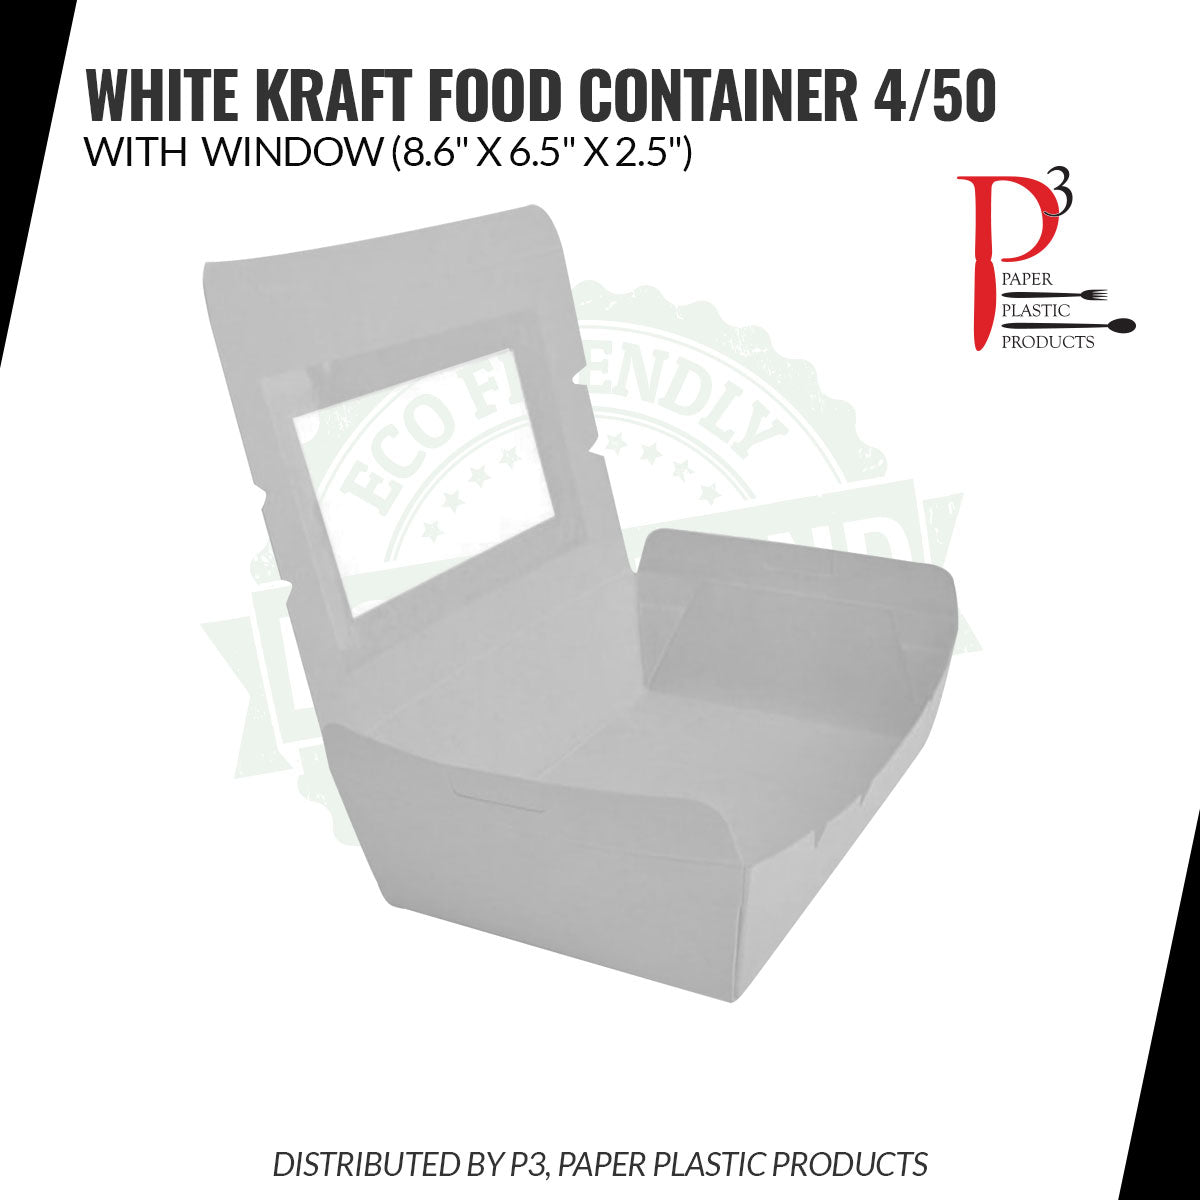 Kraft Food Container White with window 8.6" x 6.5" x 2.5" 4/50